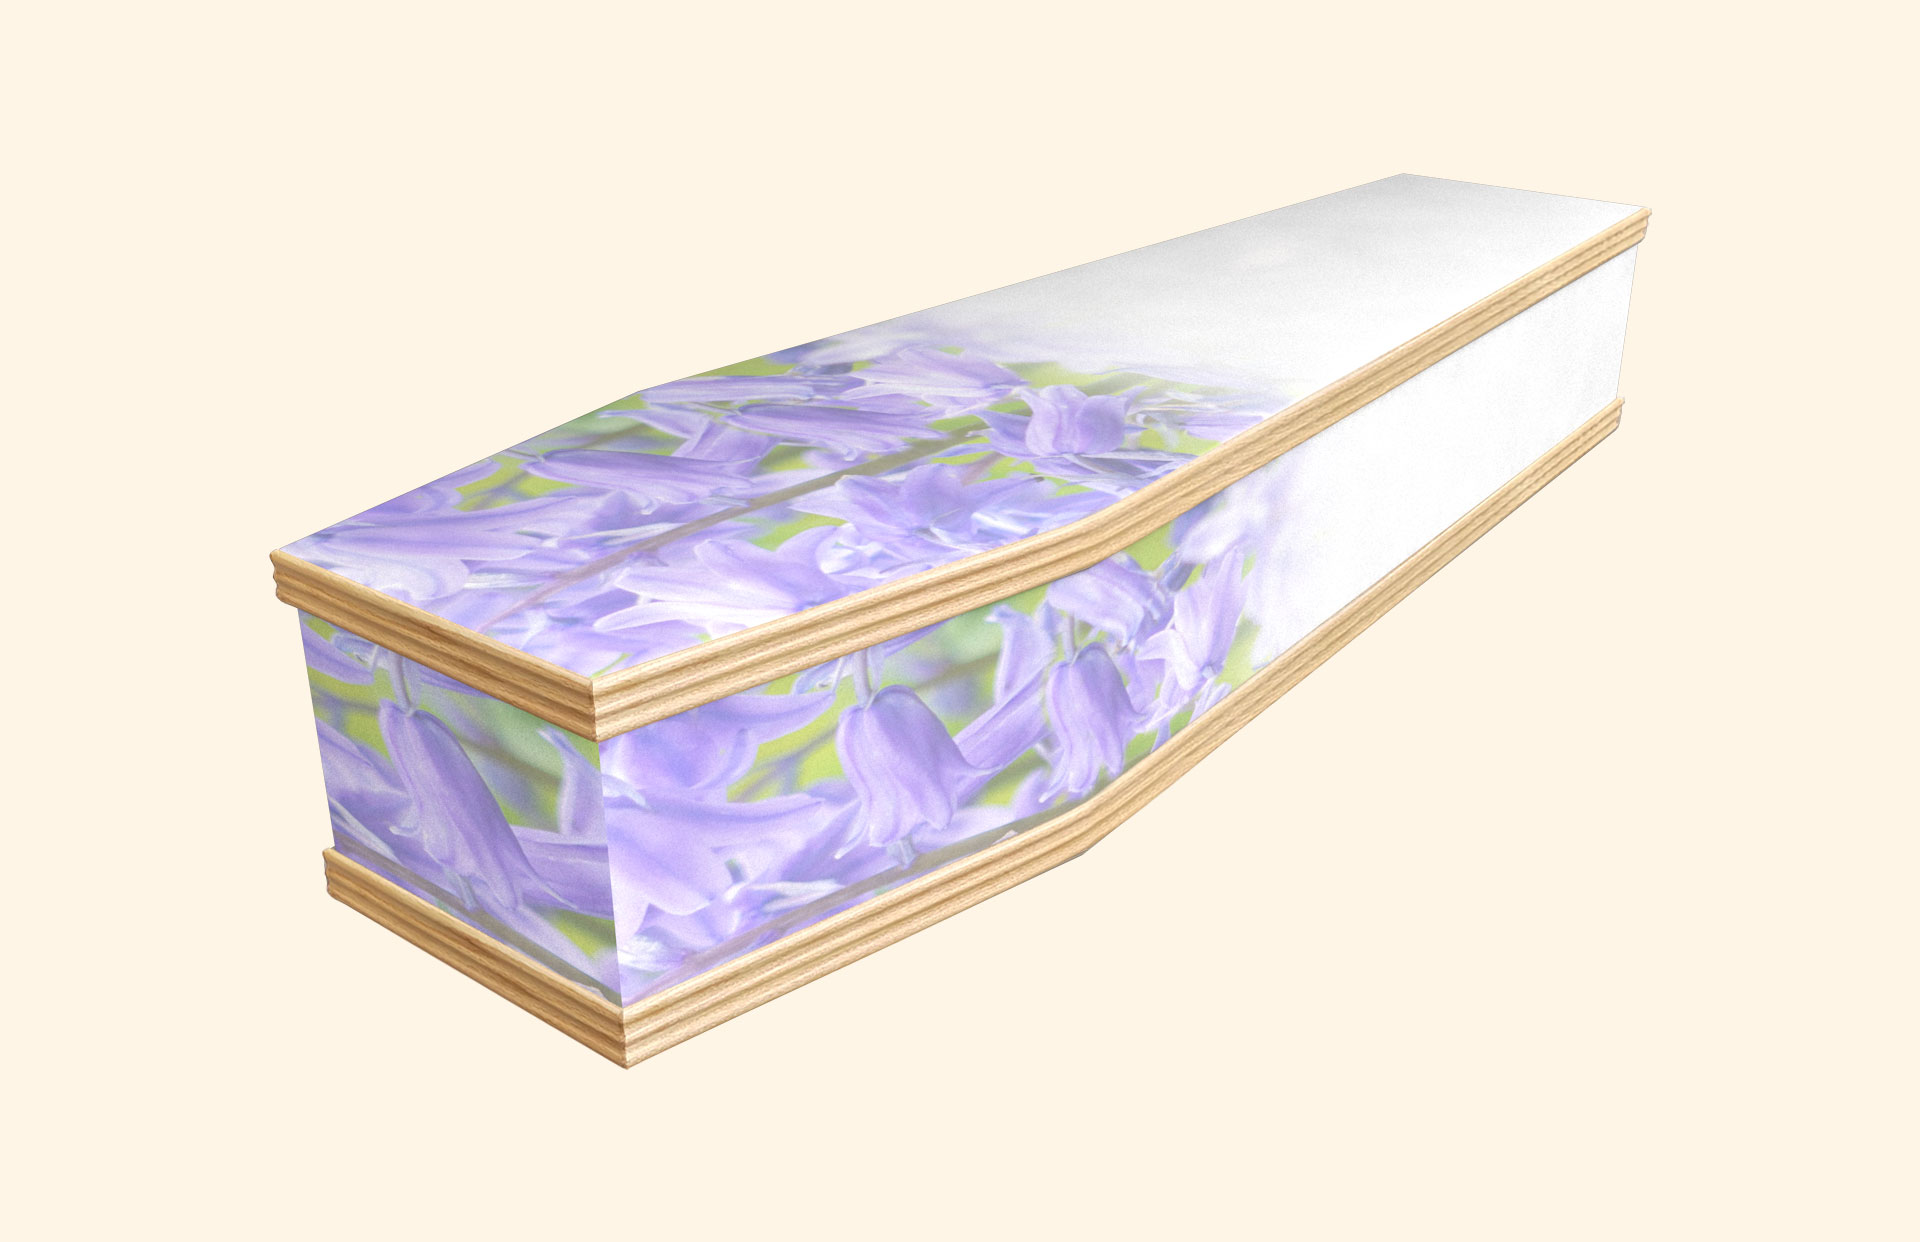 Blushing Bluebells design on a classic coffin